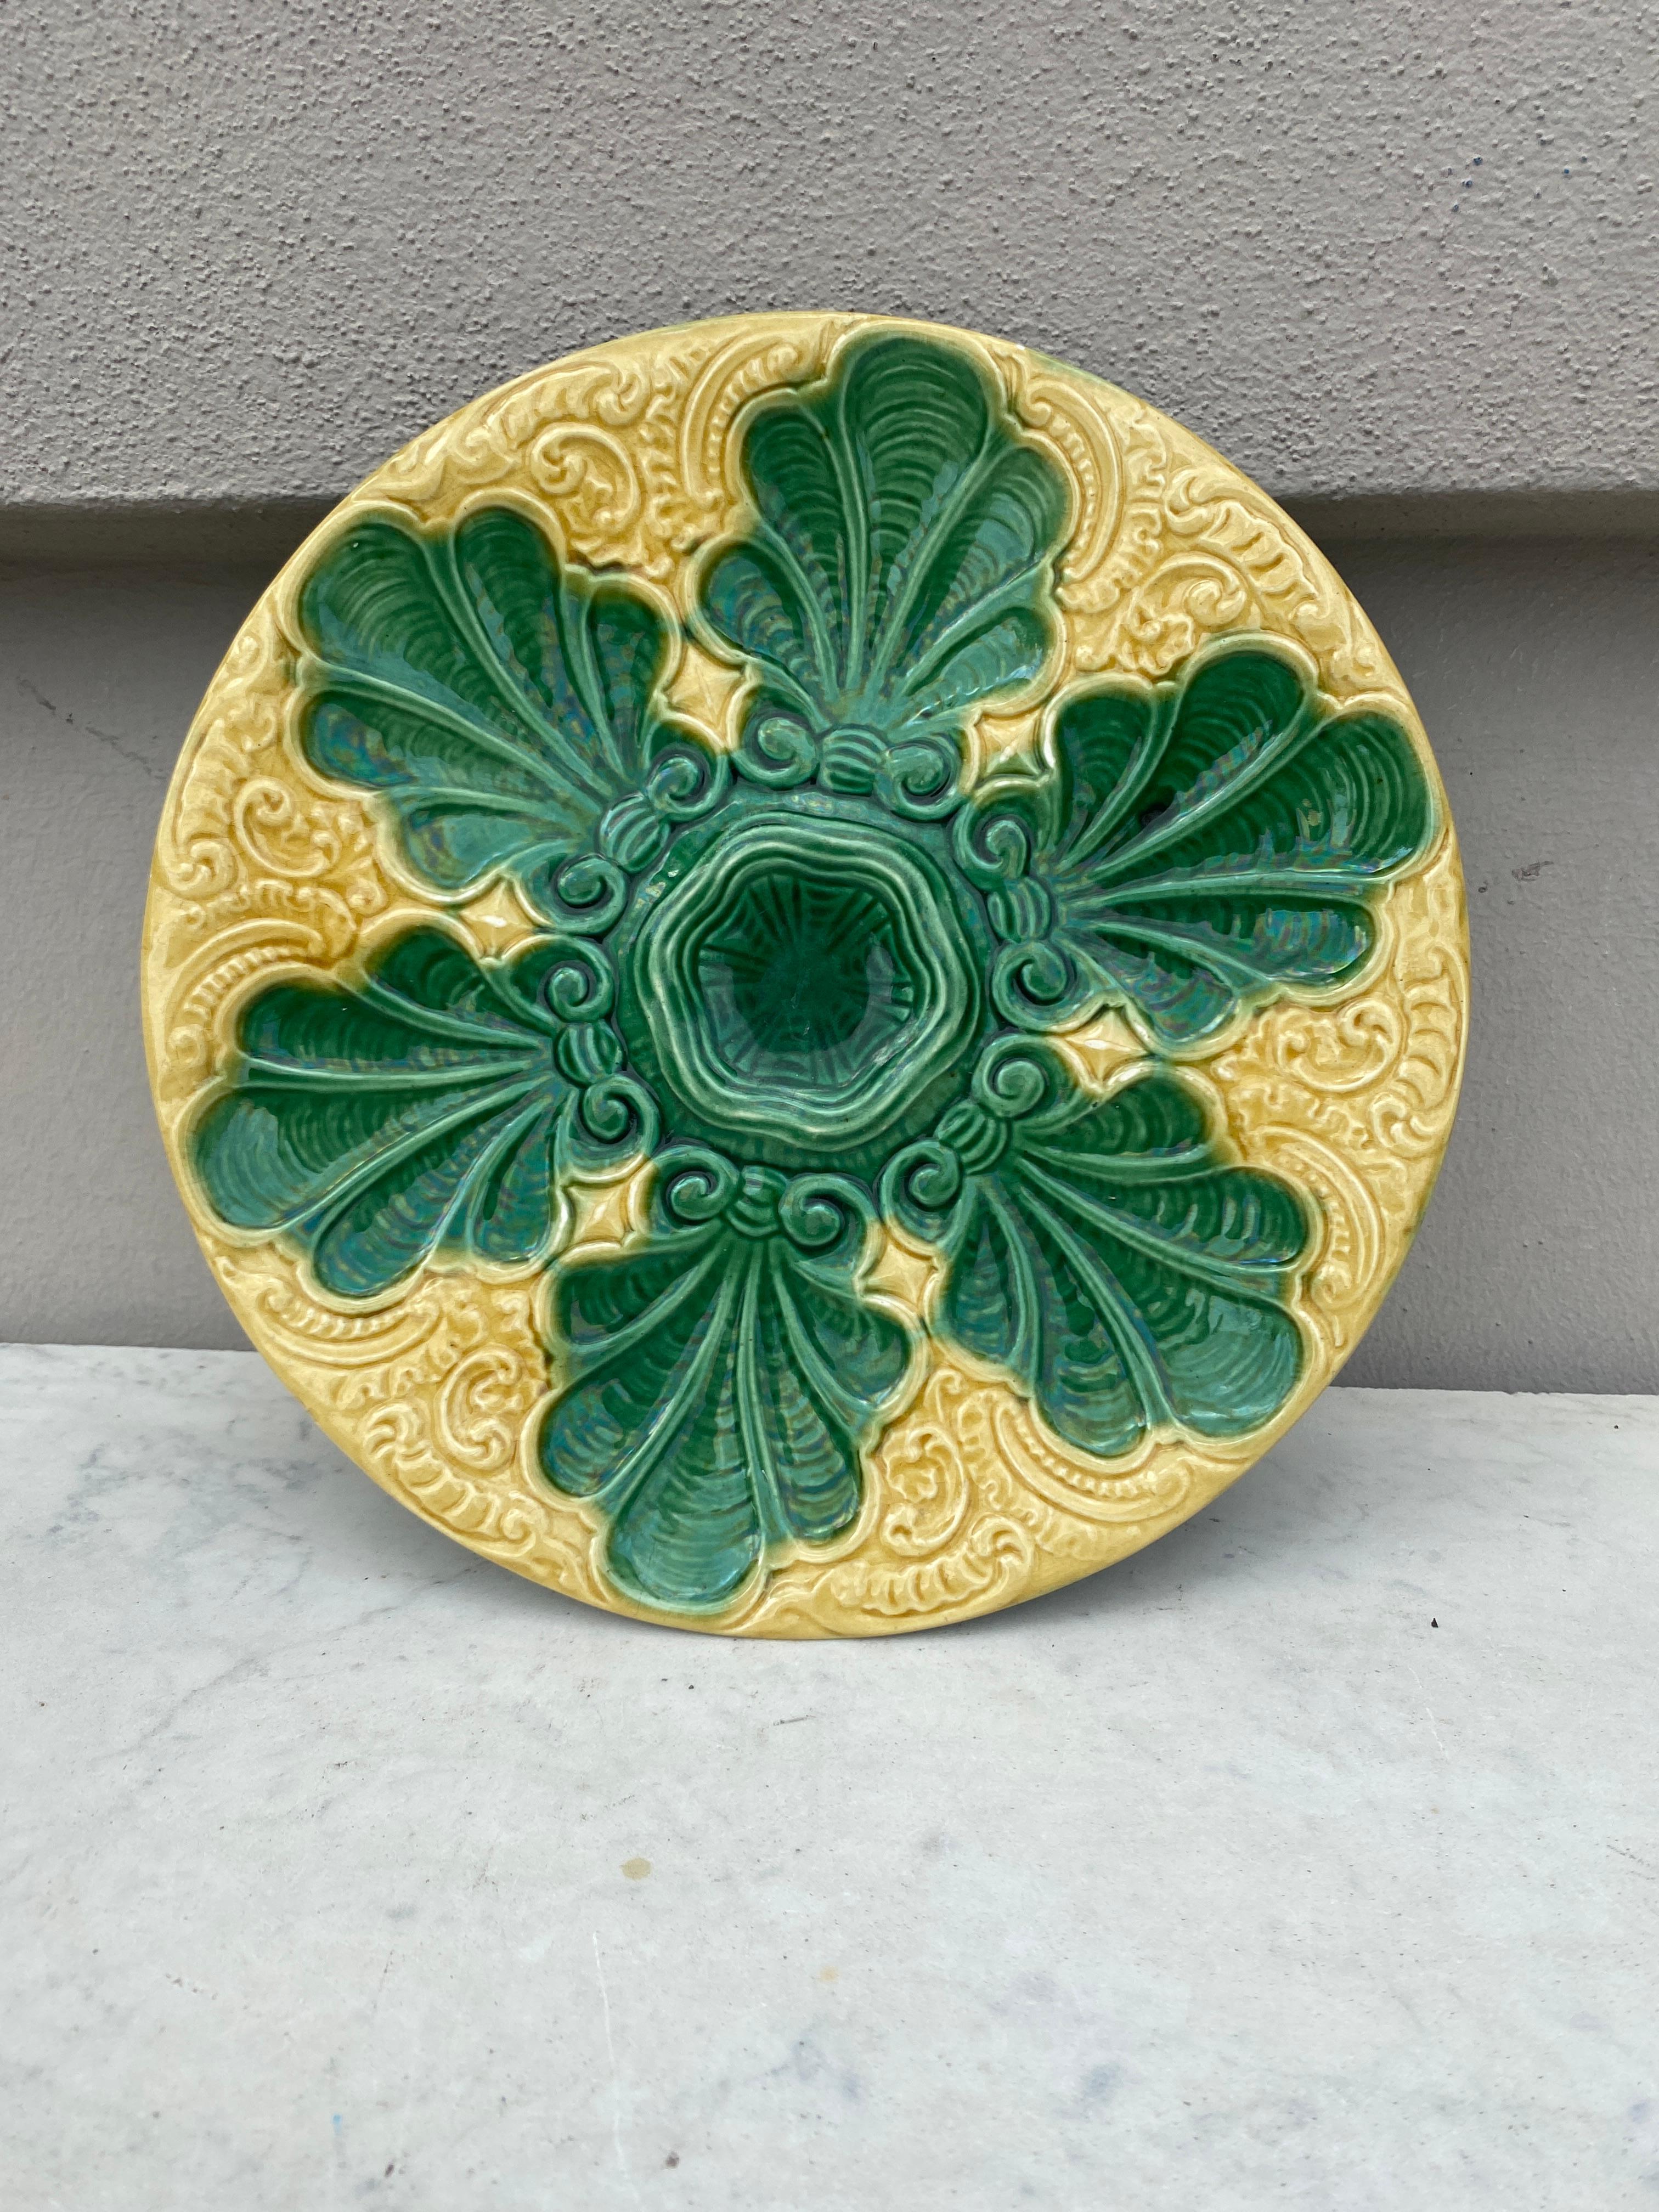 Colorful French Majolica green and yellow oyster plate with stylized leaves, circa 1890.